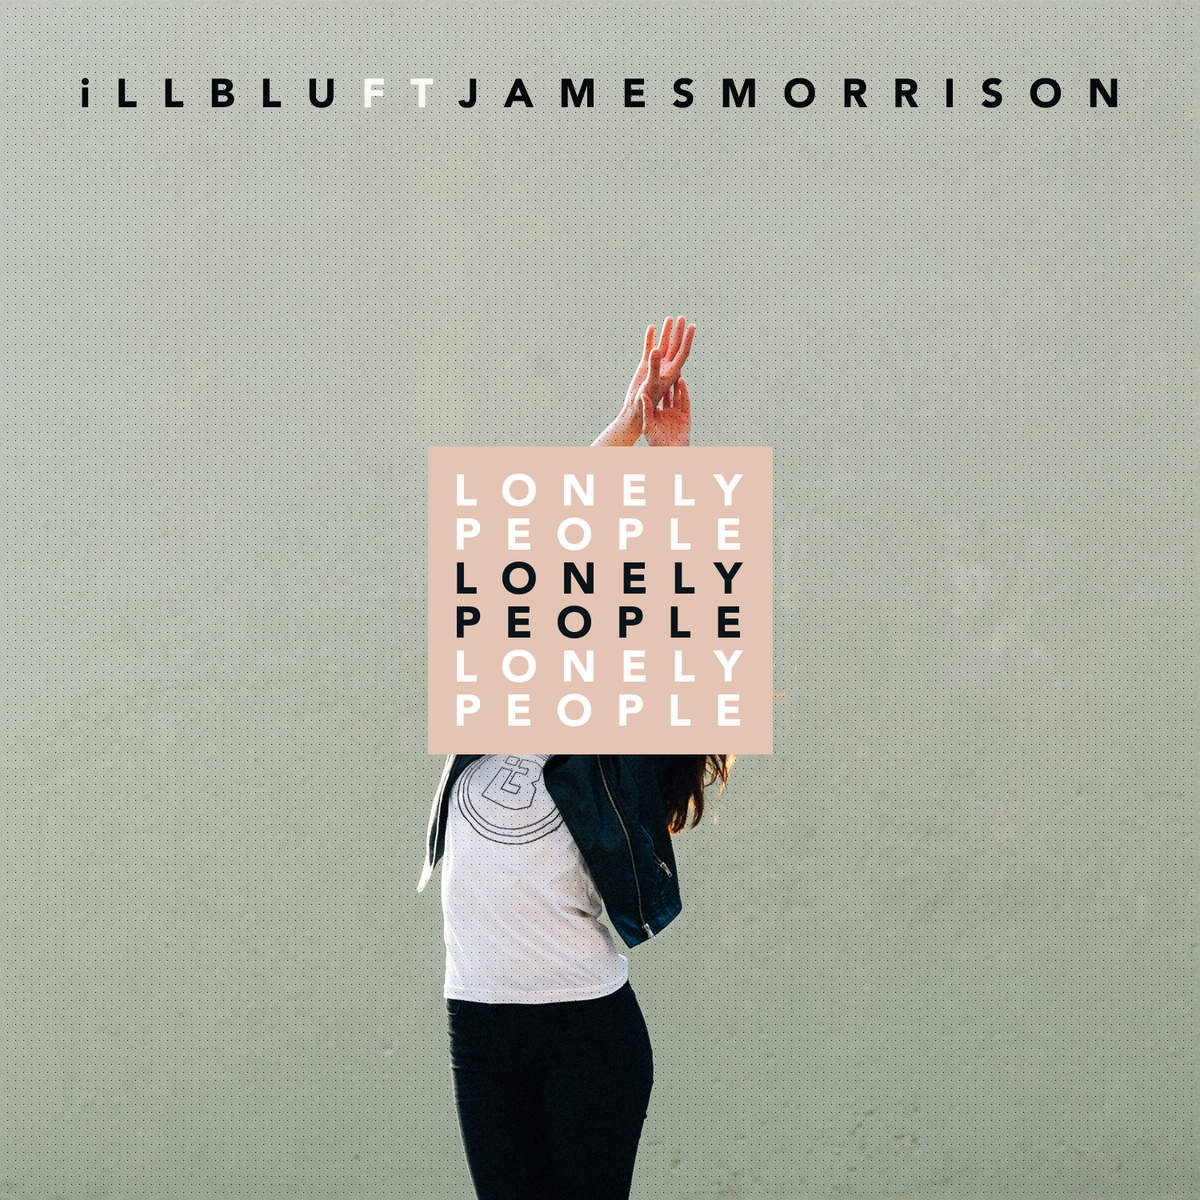 Lonely People (feat. James Morrison)